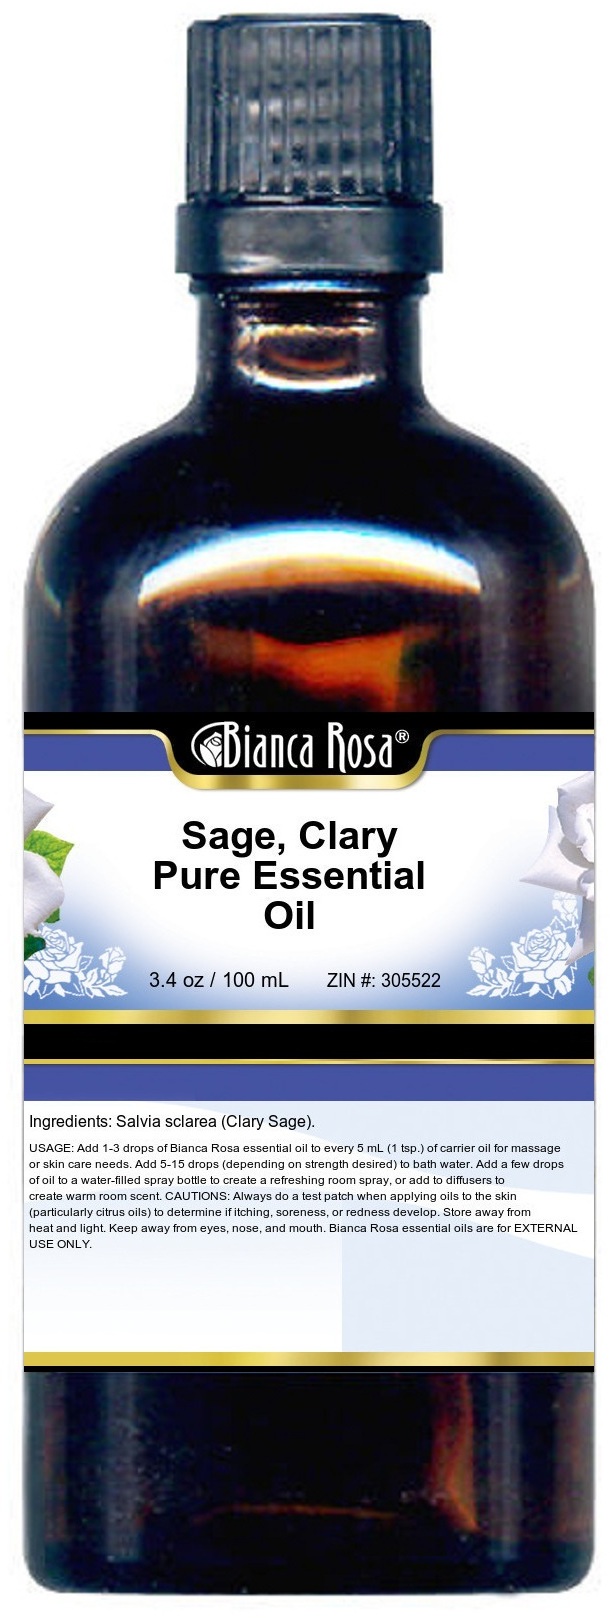 Sage, Clary Pure Essential Oil